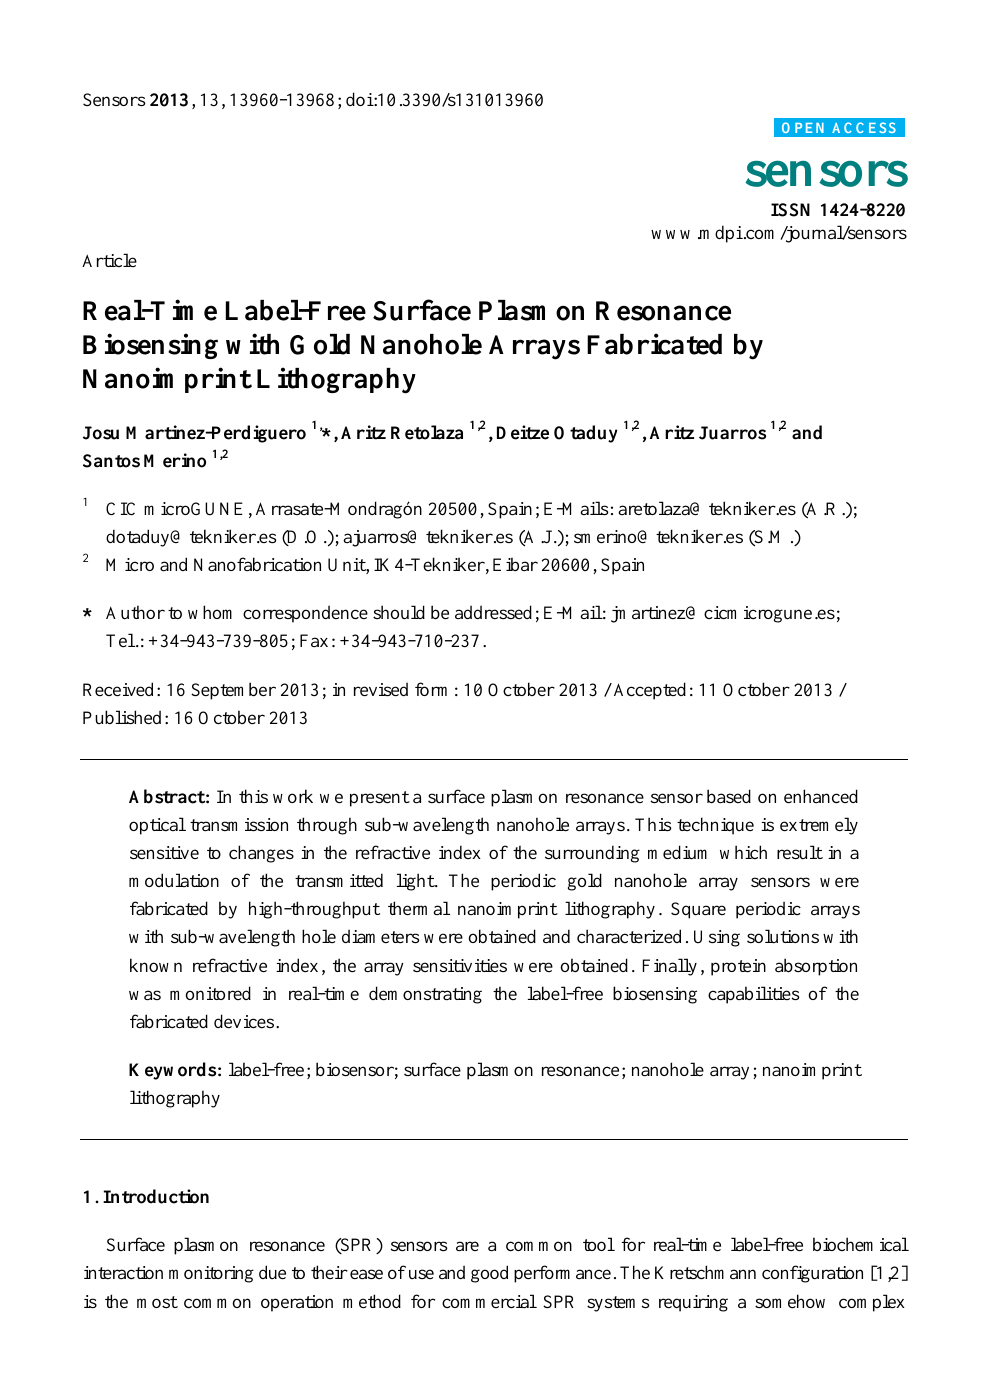 Real Time Label Free Surface Plasmon Resonance Biosensing With Gold Nanohole Arrays Fabricated By Nanoimprint Lithography Topic Of Research Paper In Nano Technology Download Scholarly Article Pdf And Read For Free On Cyberleninka Open